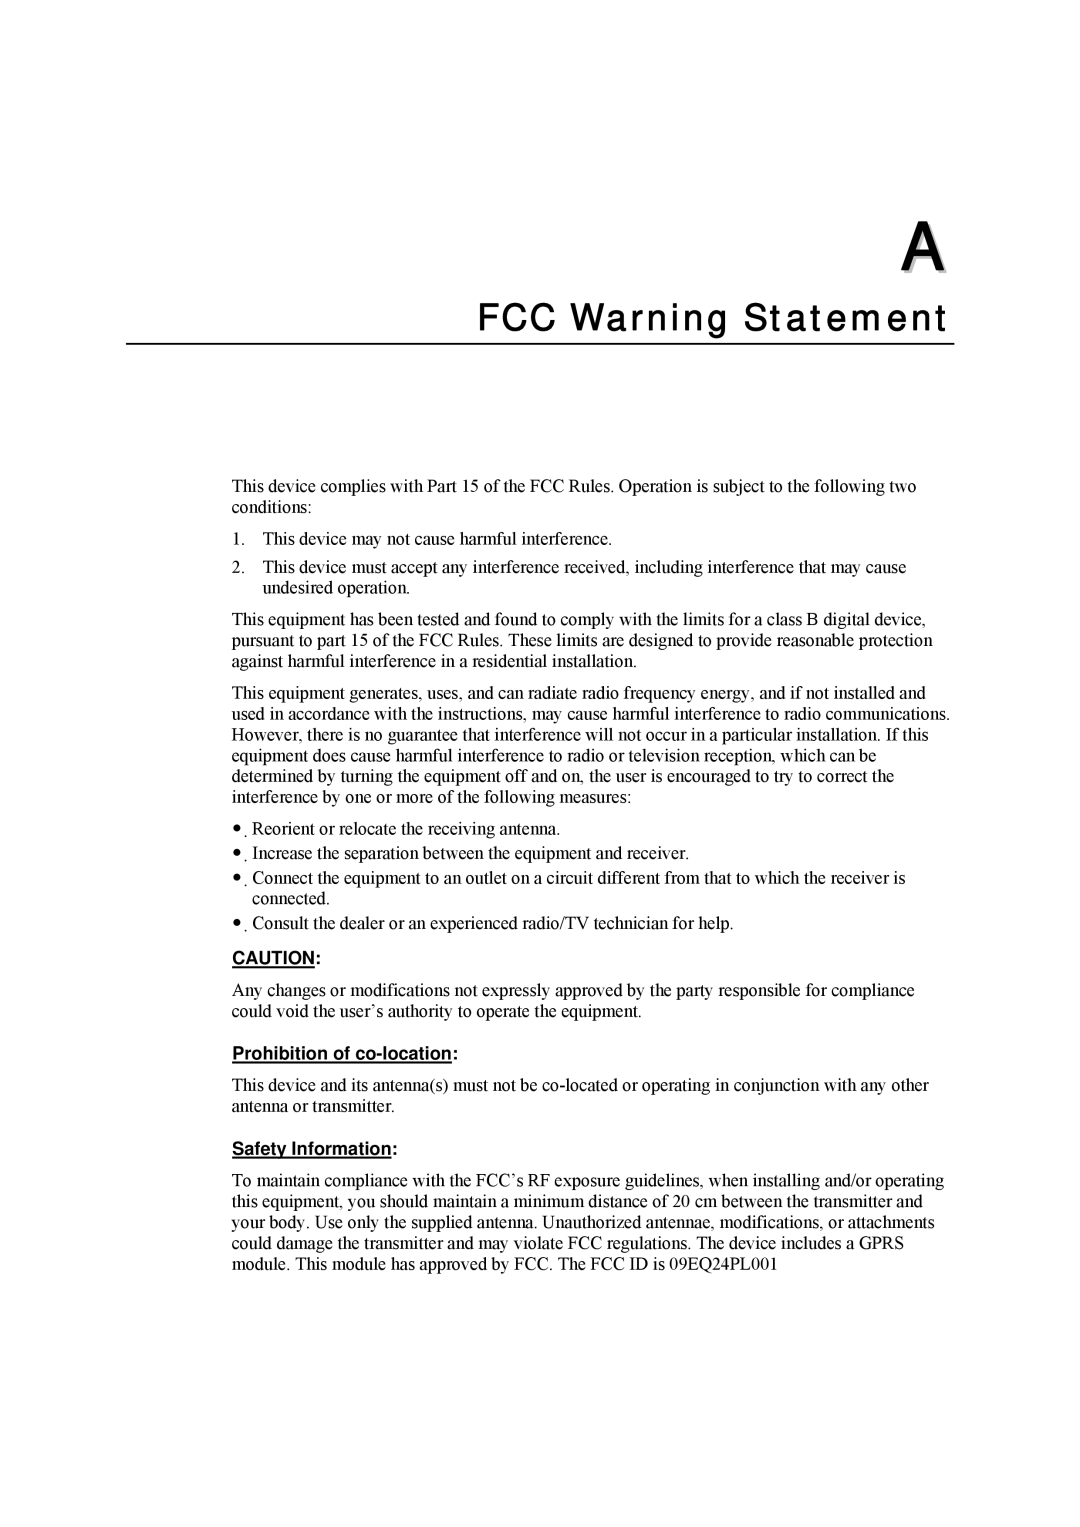 Moxa Technologies W315 user manual FCC Warning Statement, Prohibition of co-location, Safety Information 